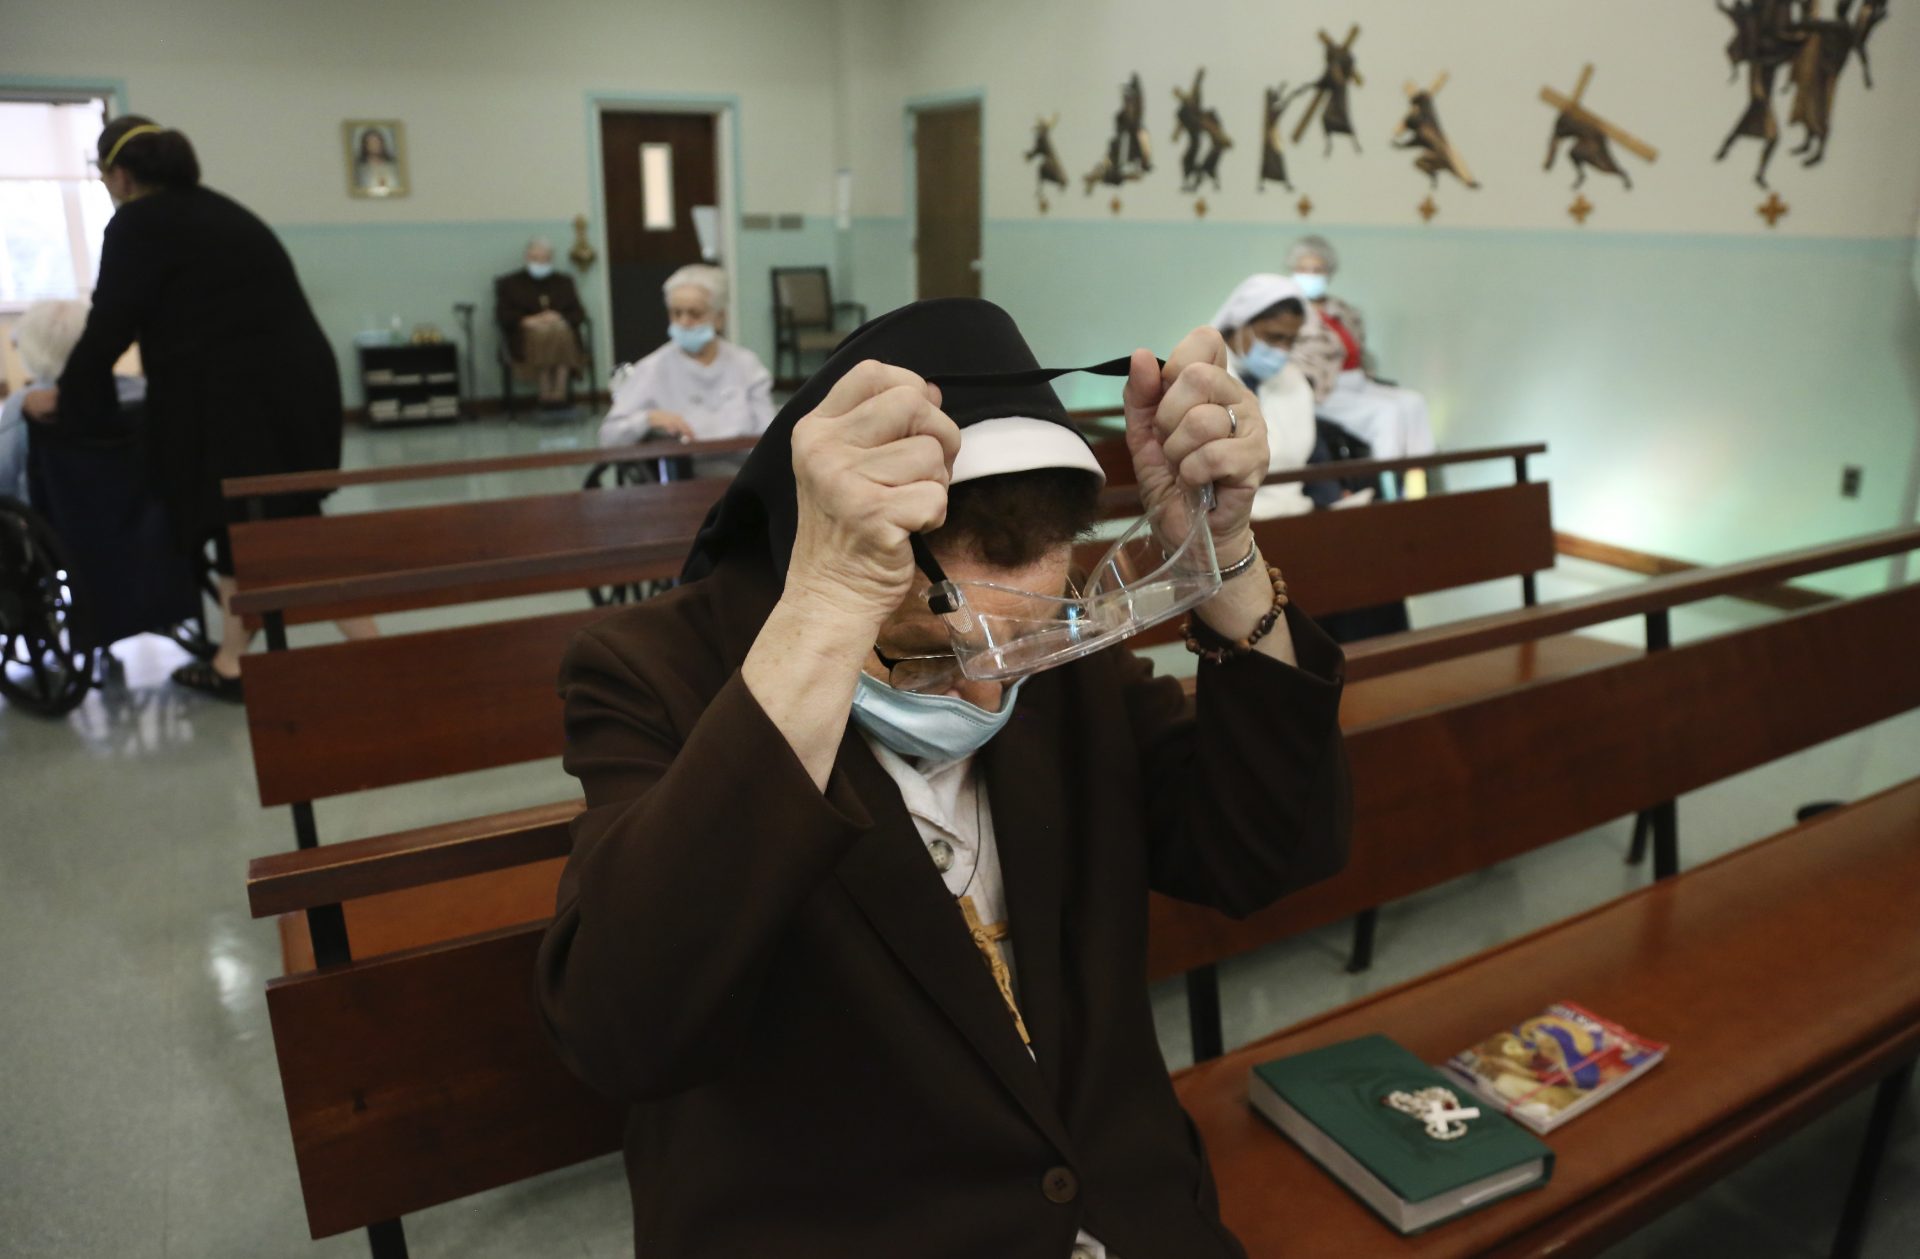 Sister Mary Carol Kardell, of the Felician Sisters of North America, puts on goggles after morning Mass at St. Anne Home in Greensburg, Pa., on Thursday, March 25, 2021.